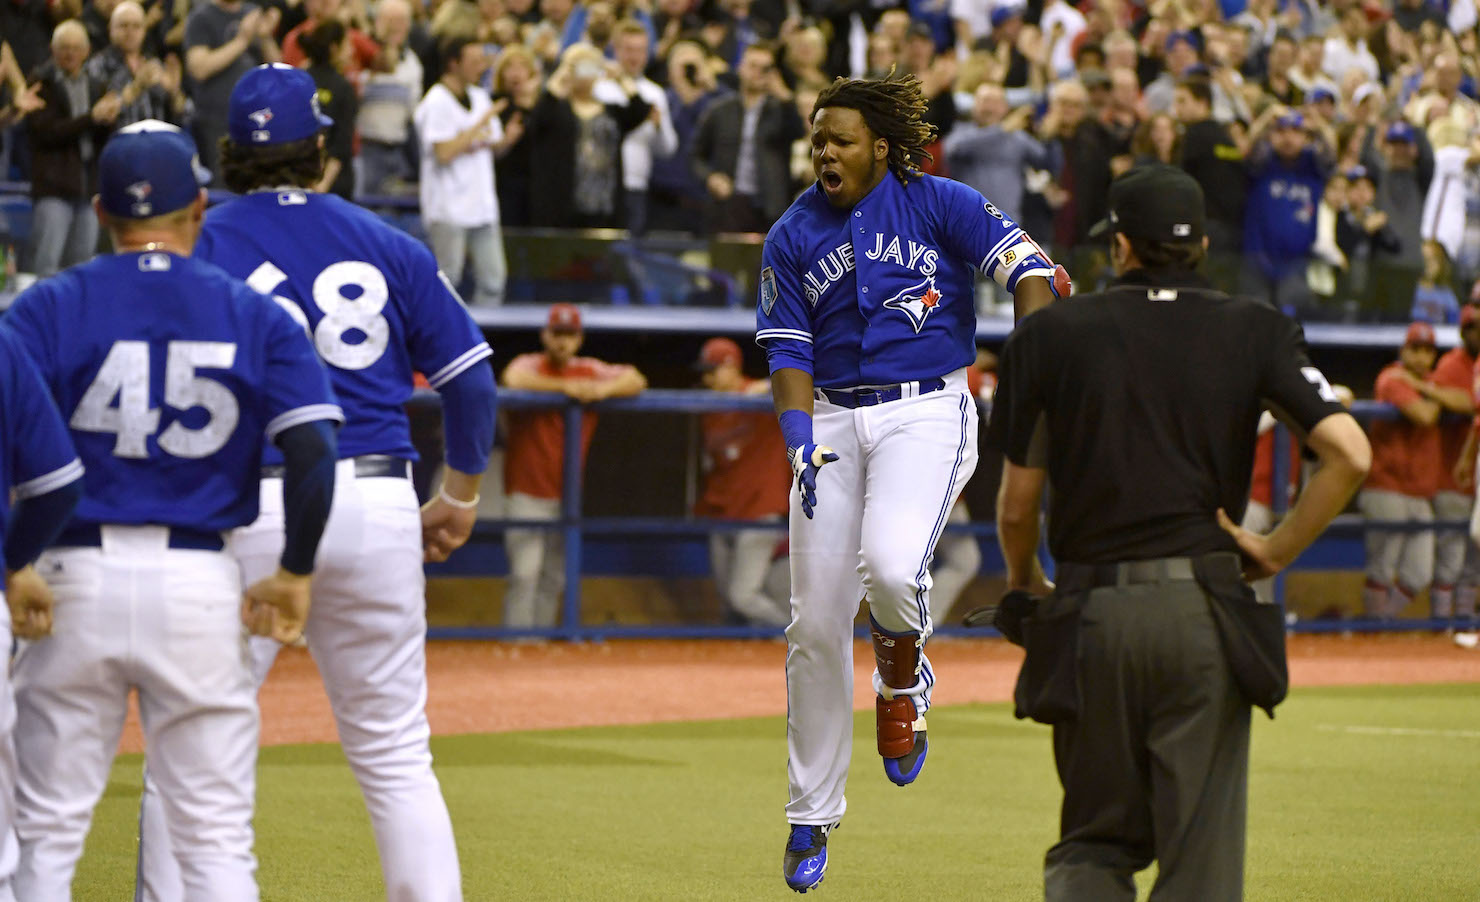 The French broadcast booth went completely nuts for Vlad Guerrero Jr.'s  walk-off homer